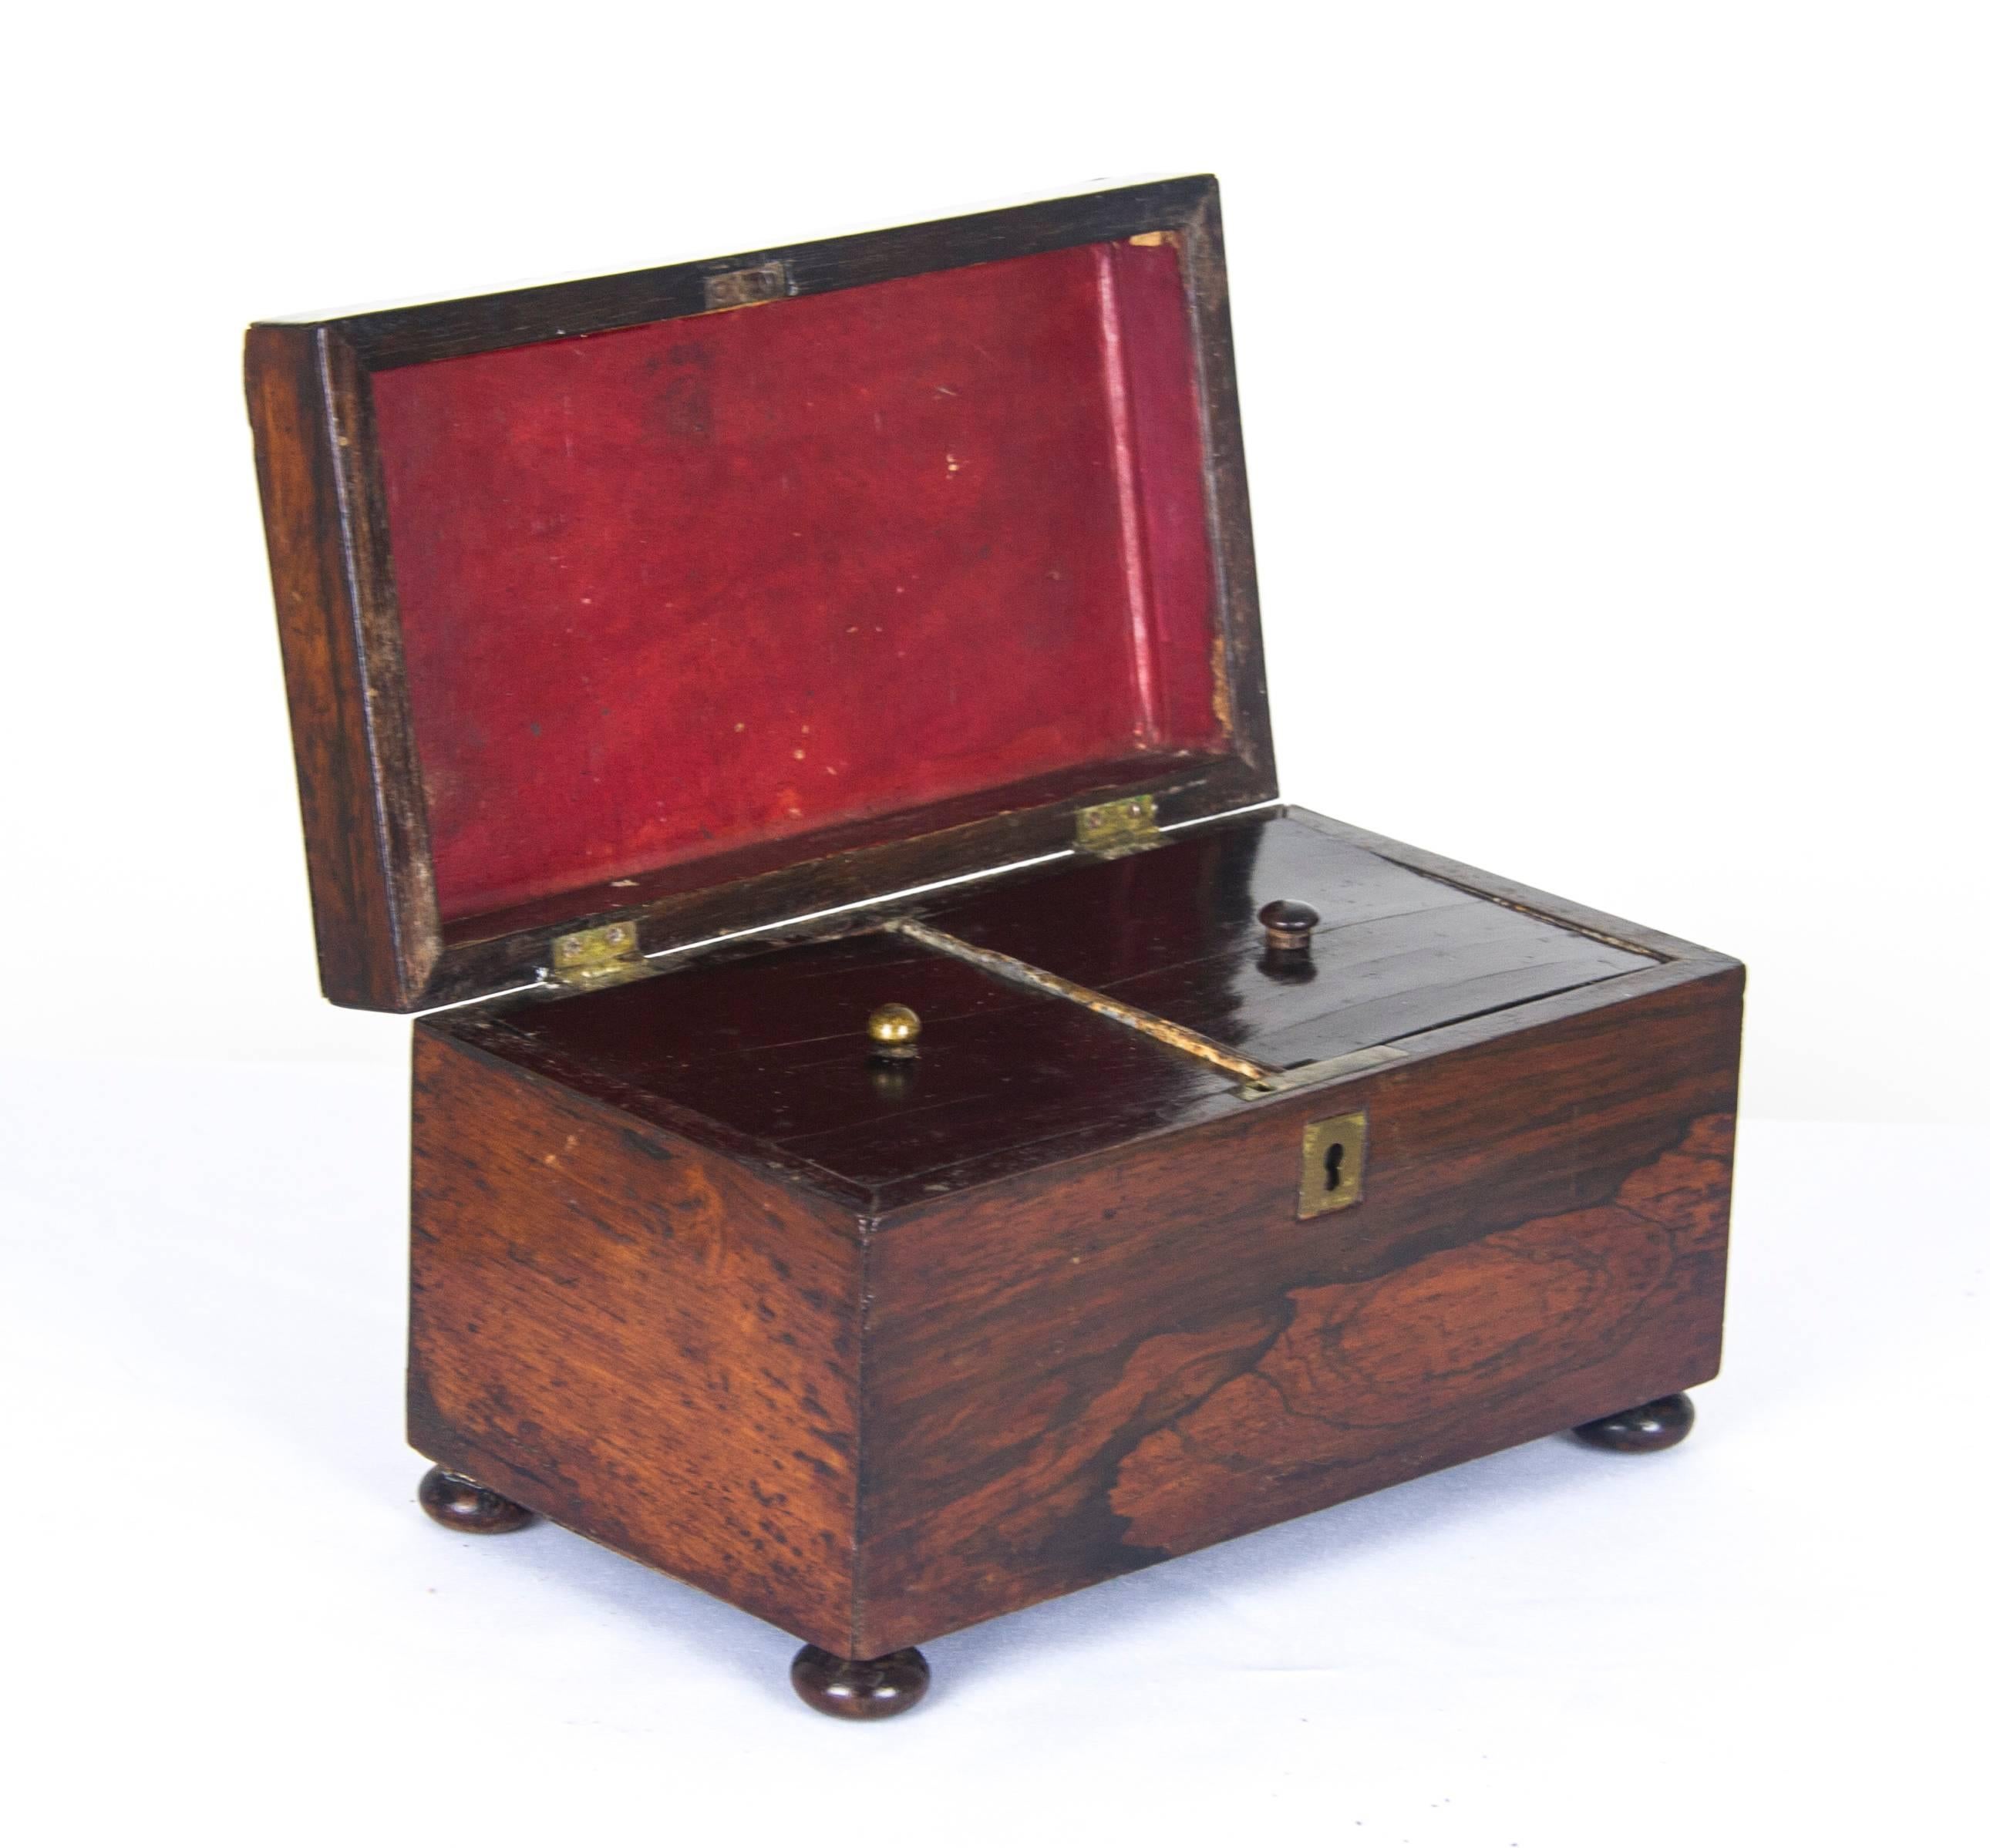 Antique tea caddy rosewood tea caddy regency, Scotland, 1820. B882

Scotland, 1820
Solid rosewood
Original finish
Shaped top
Two interior liners with lids
Ending on bun feet
Original lock
Lovely quality and condition

$450

 
Measure: